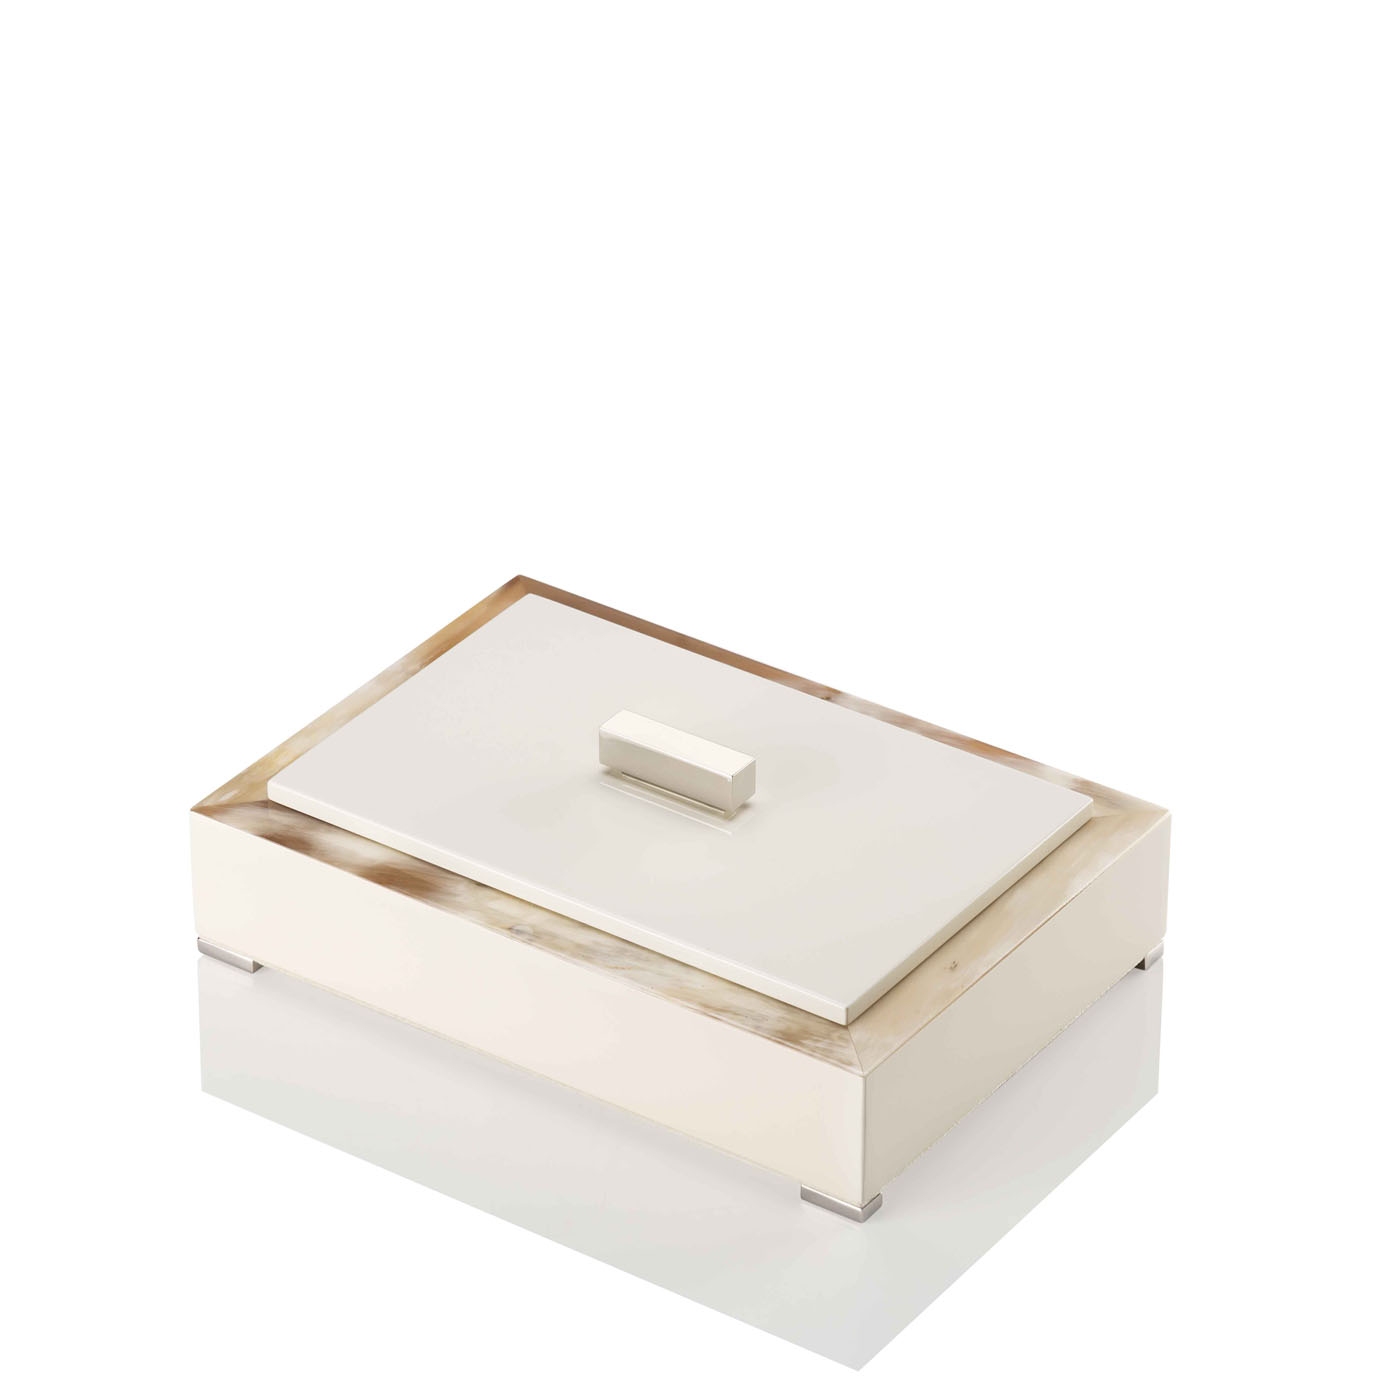 Picture frames and boxes - Selene box in horn and glossy ivory lacquered wood - ambiance picture - Arcahorn